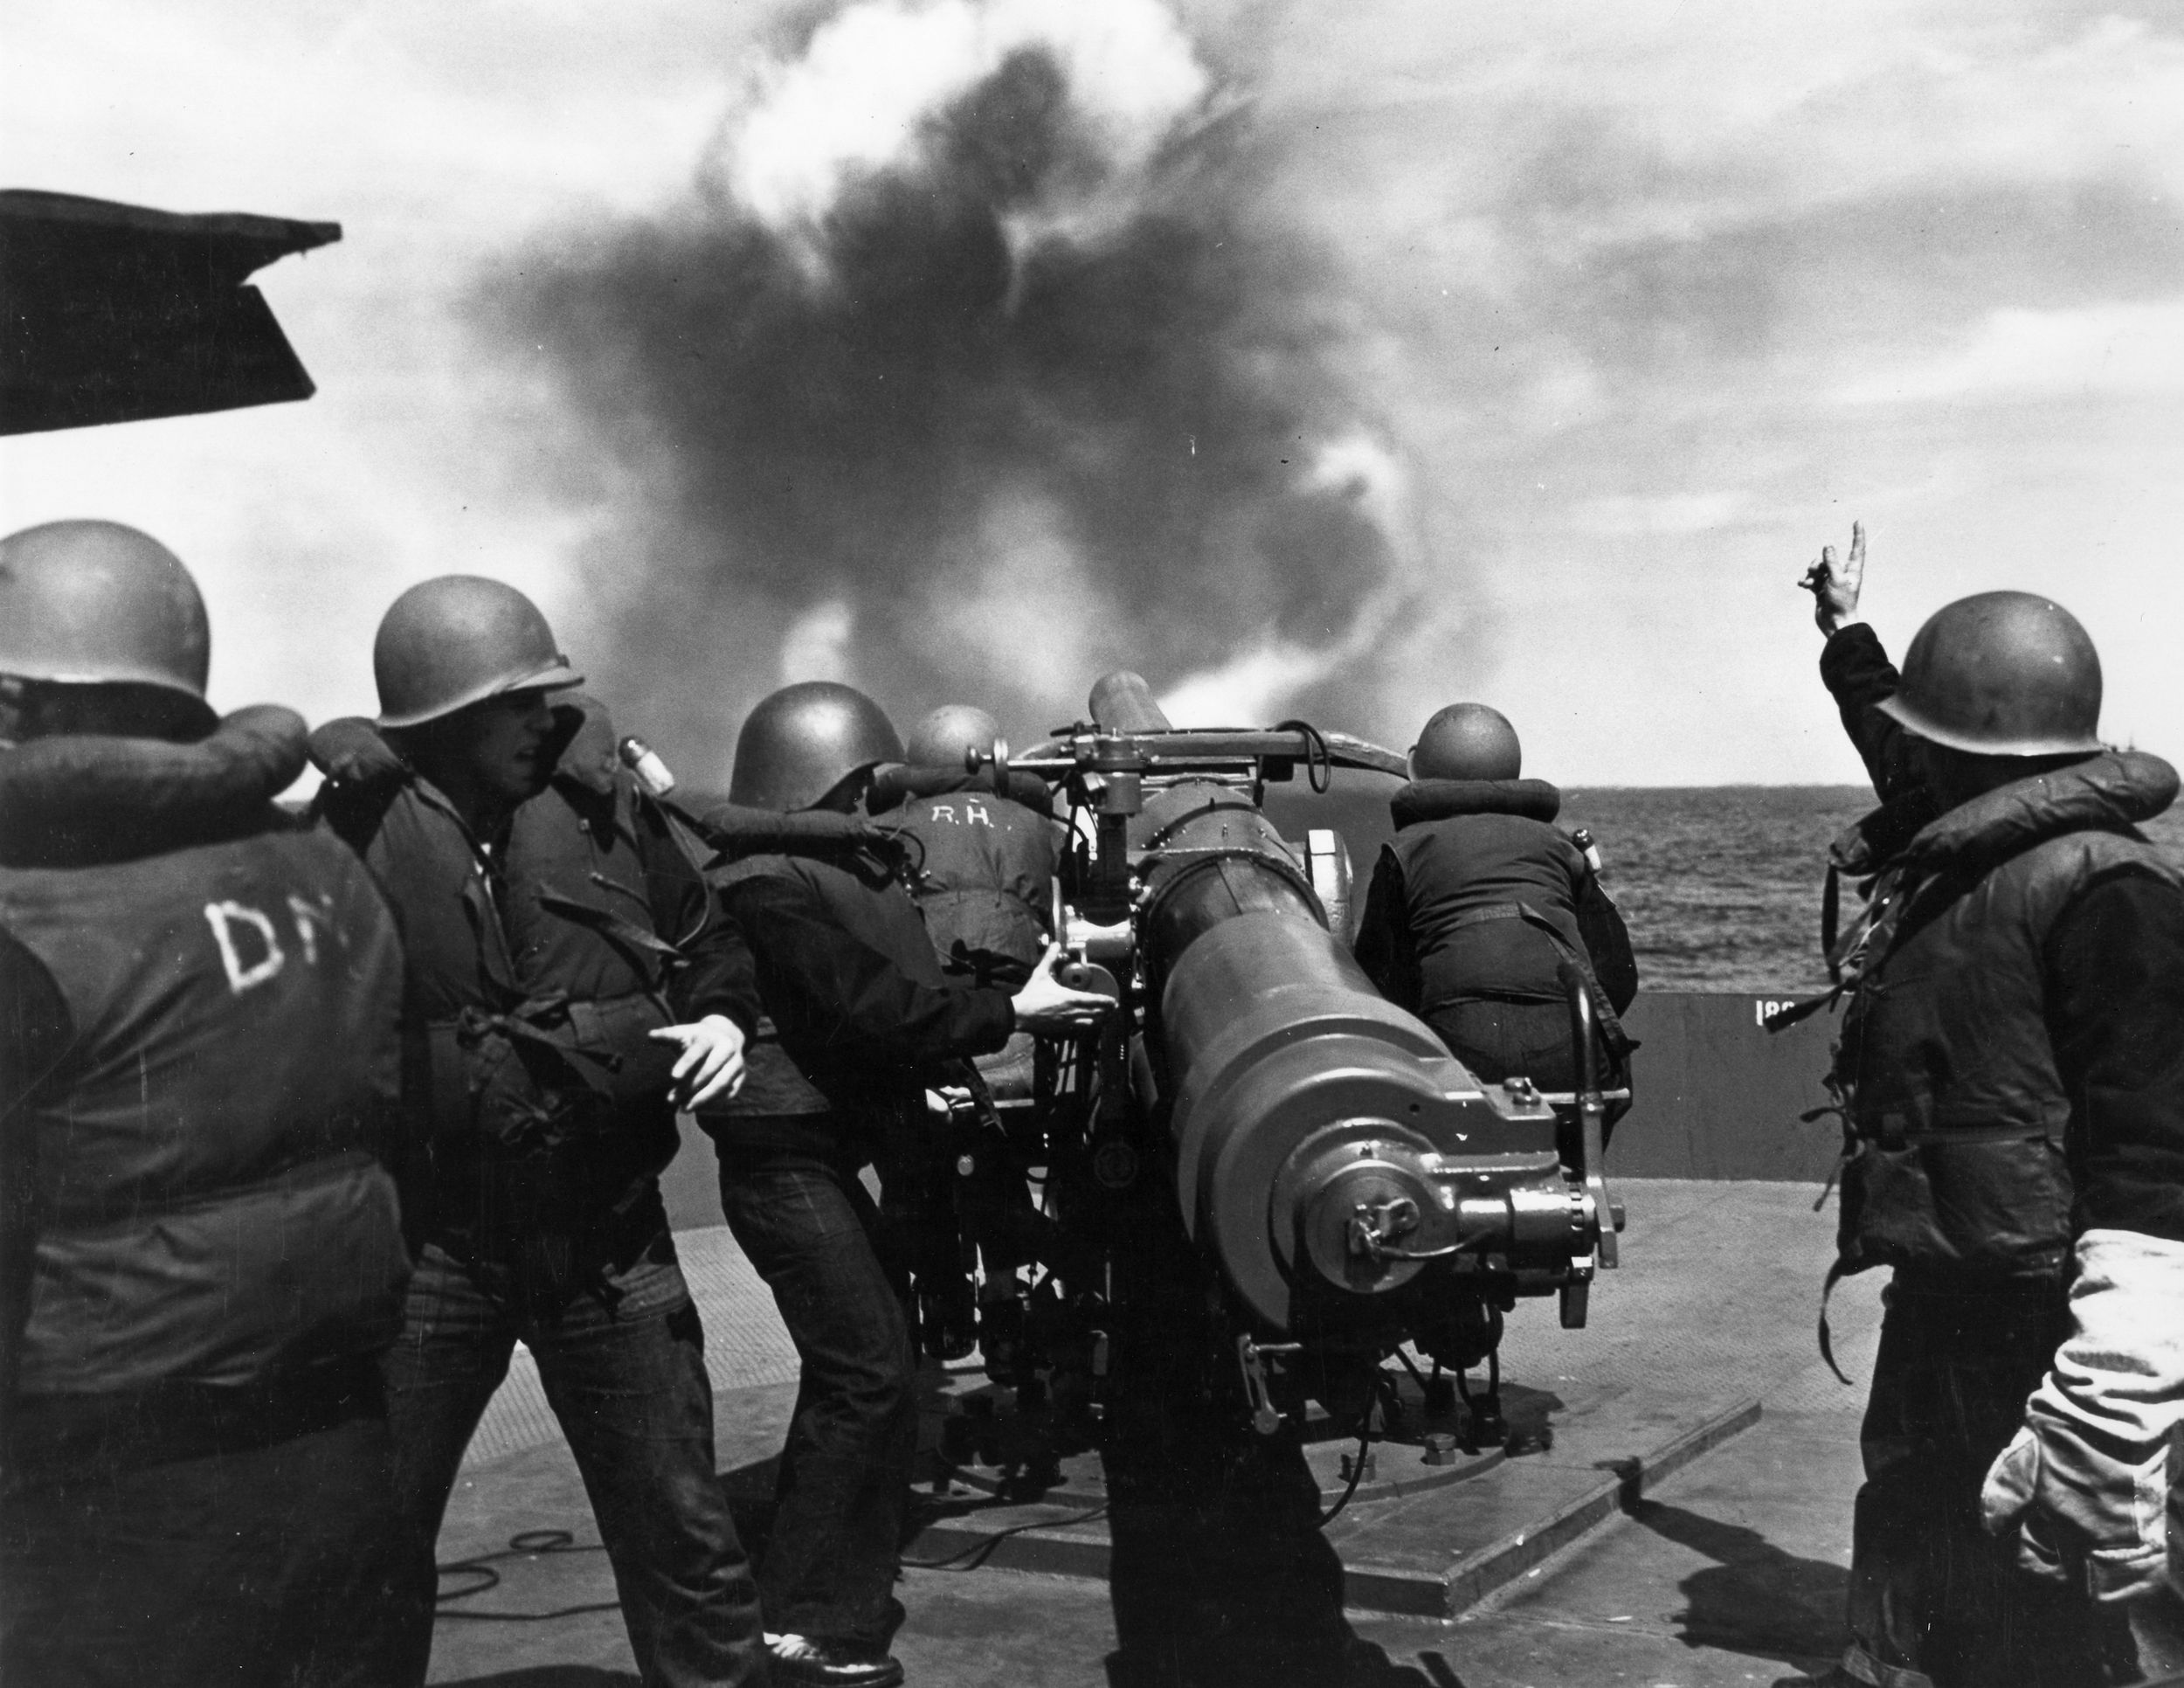 During gunnery practice at sea in September 1943, Naval Armed Guardsmen learn the finer points of operating the 4-inch deck gun aboard a merchant ship. Virtually unknown outside the Navy itself, Armed Guardsmen provided some measure of defense against enemy attack.